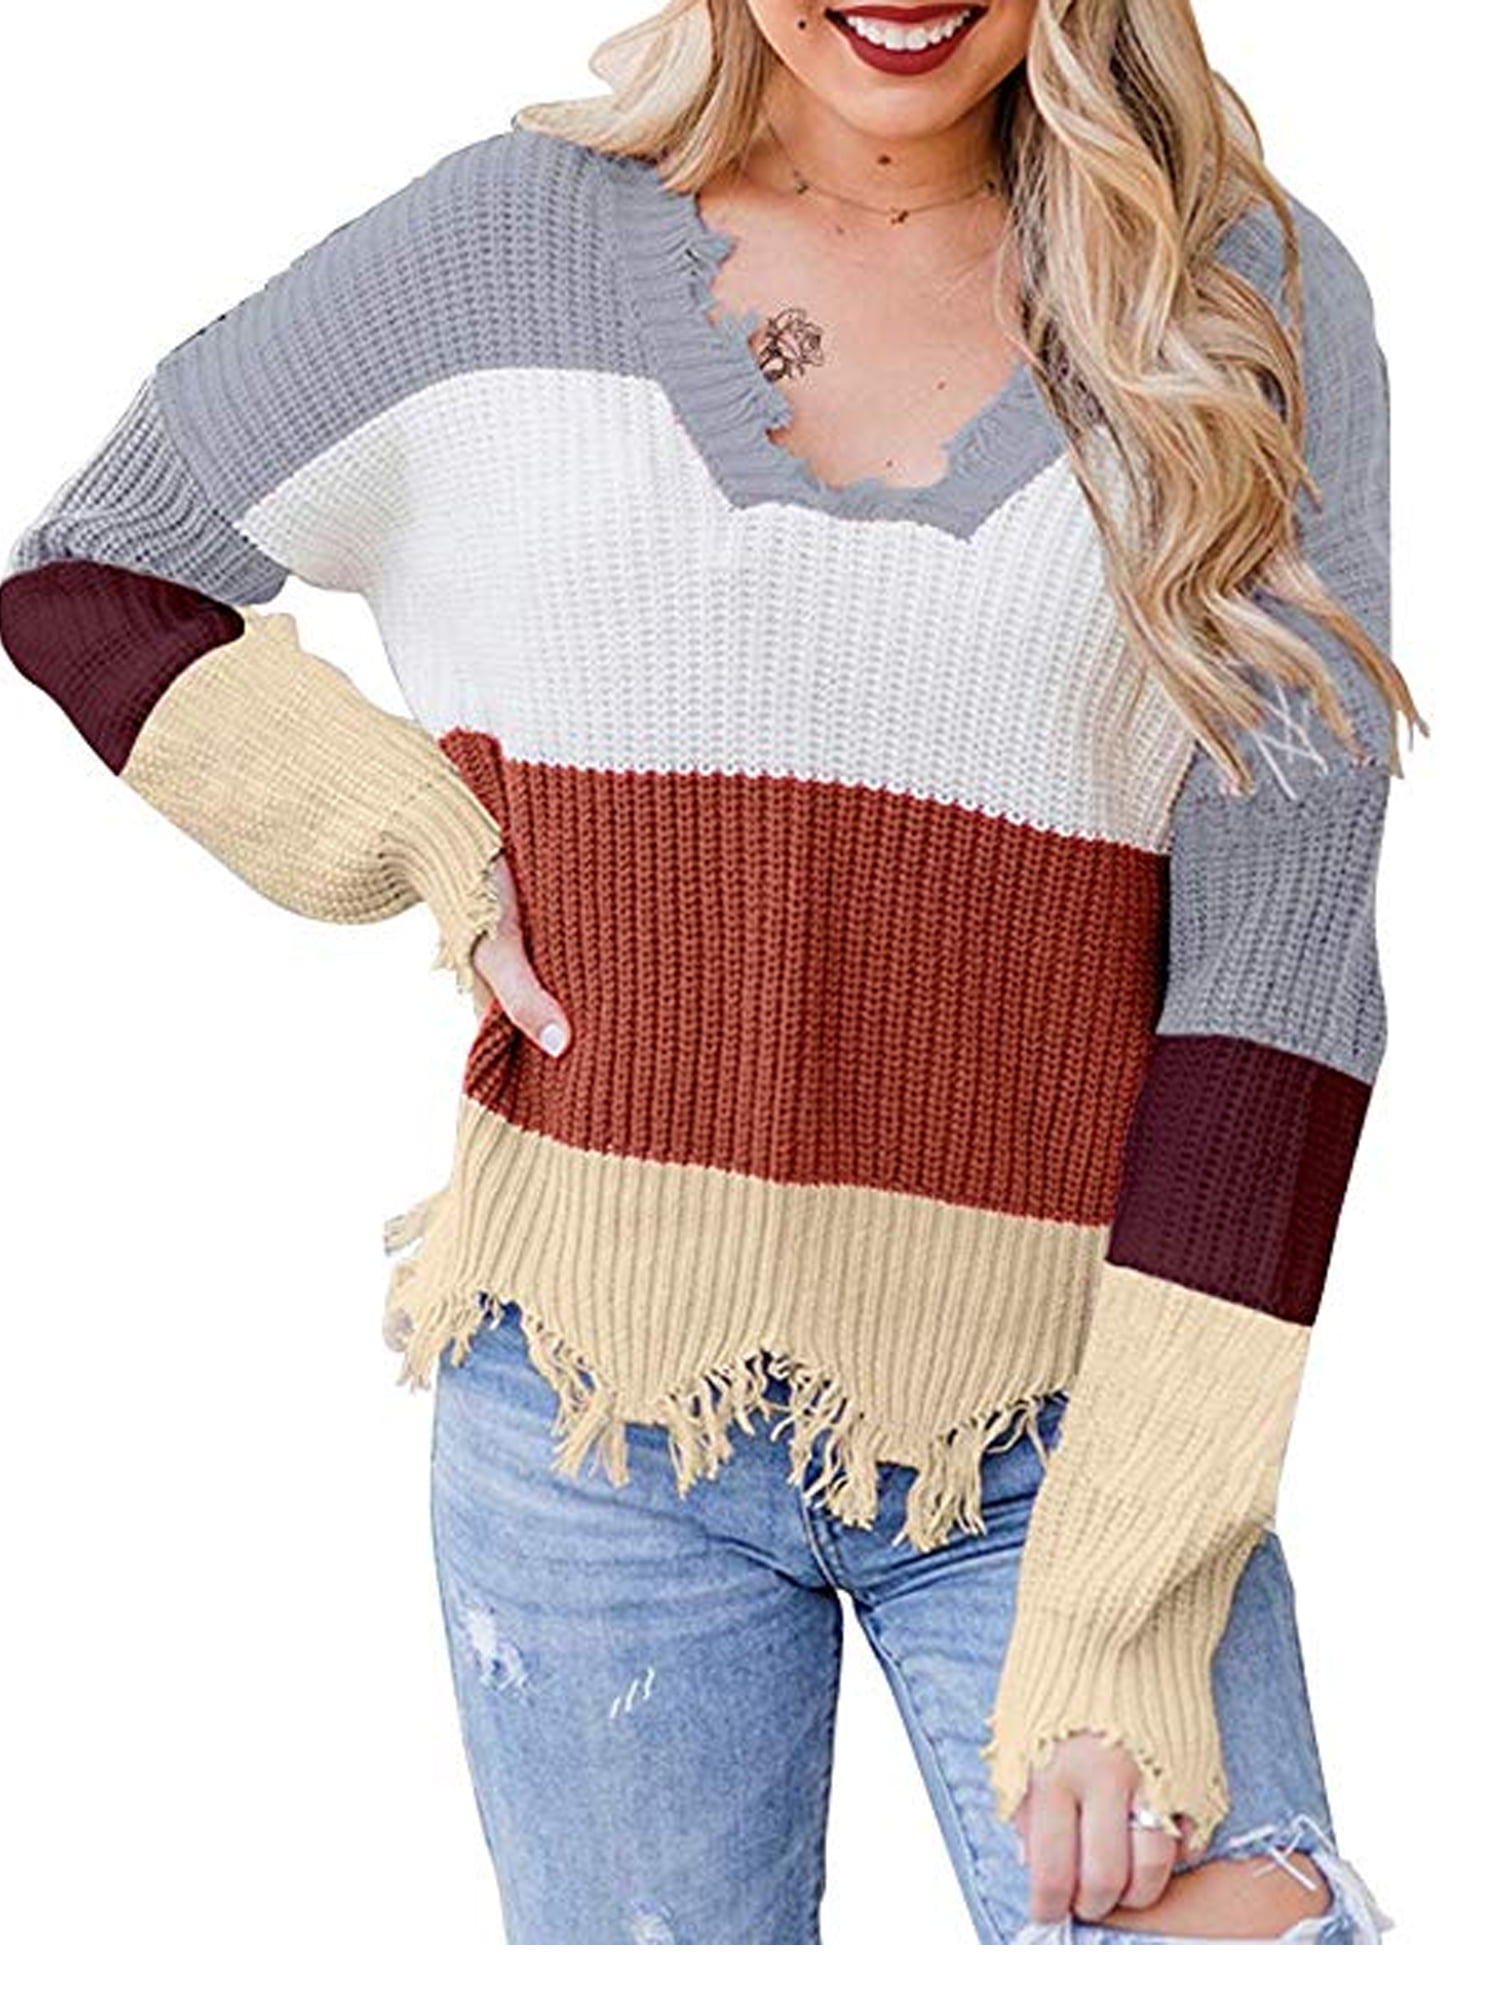 Women's One Shoulder Long Sleeve Sweater Pullover Jumper Casual Tops Knit Blouse